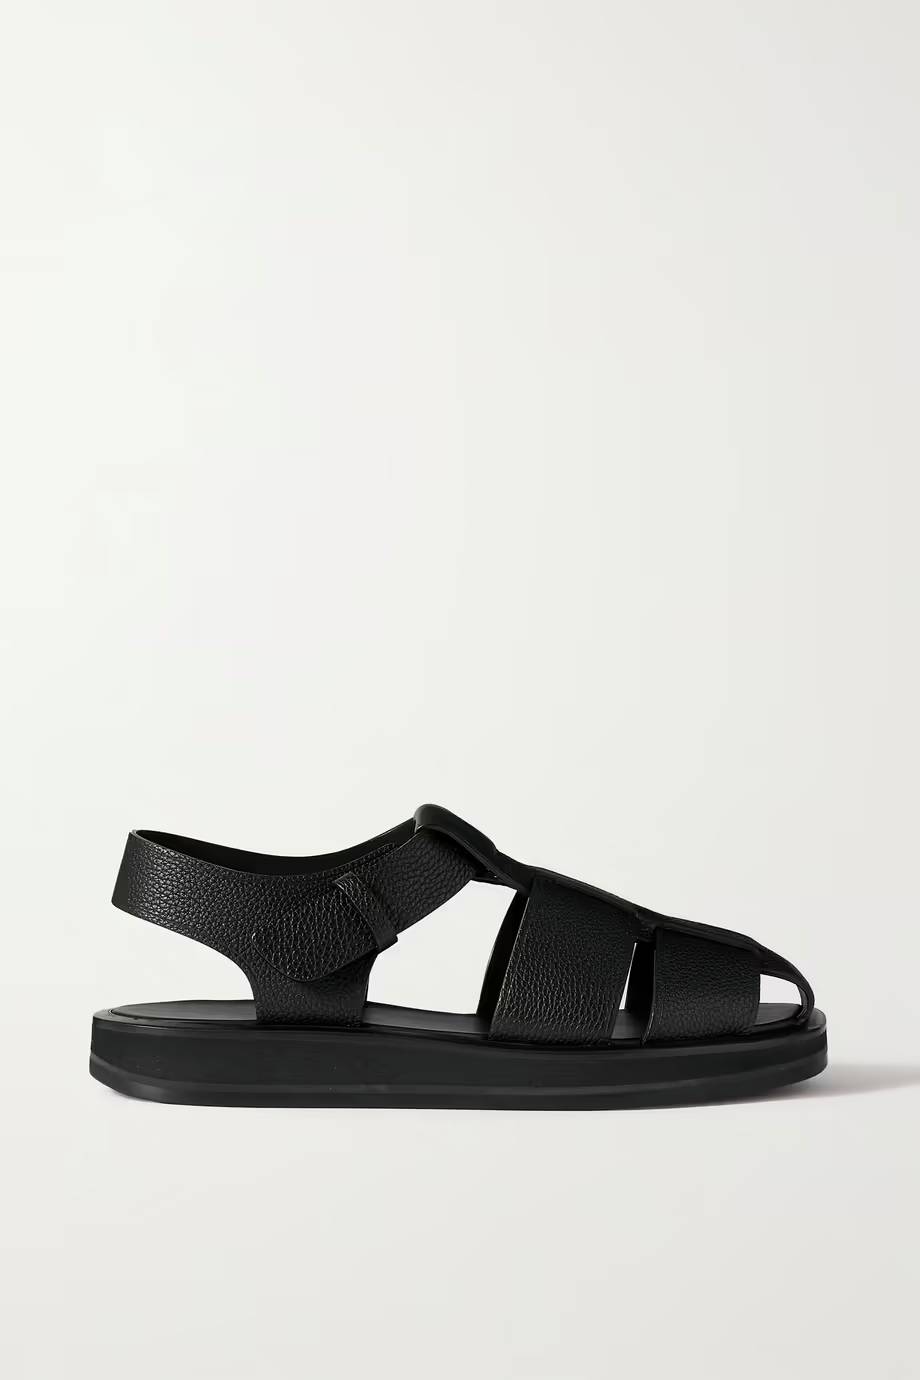 These £50 M&S Fisherman Sandals Look Just Like The Row | Who What Wear